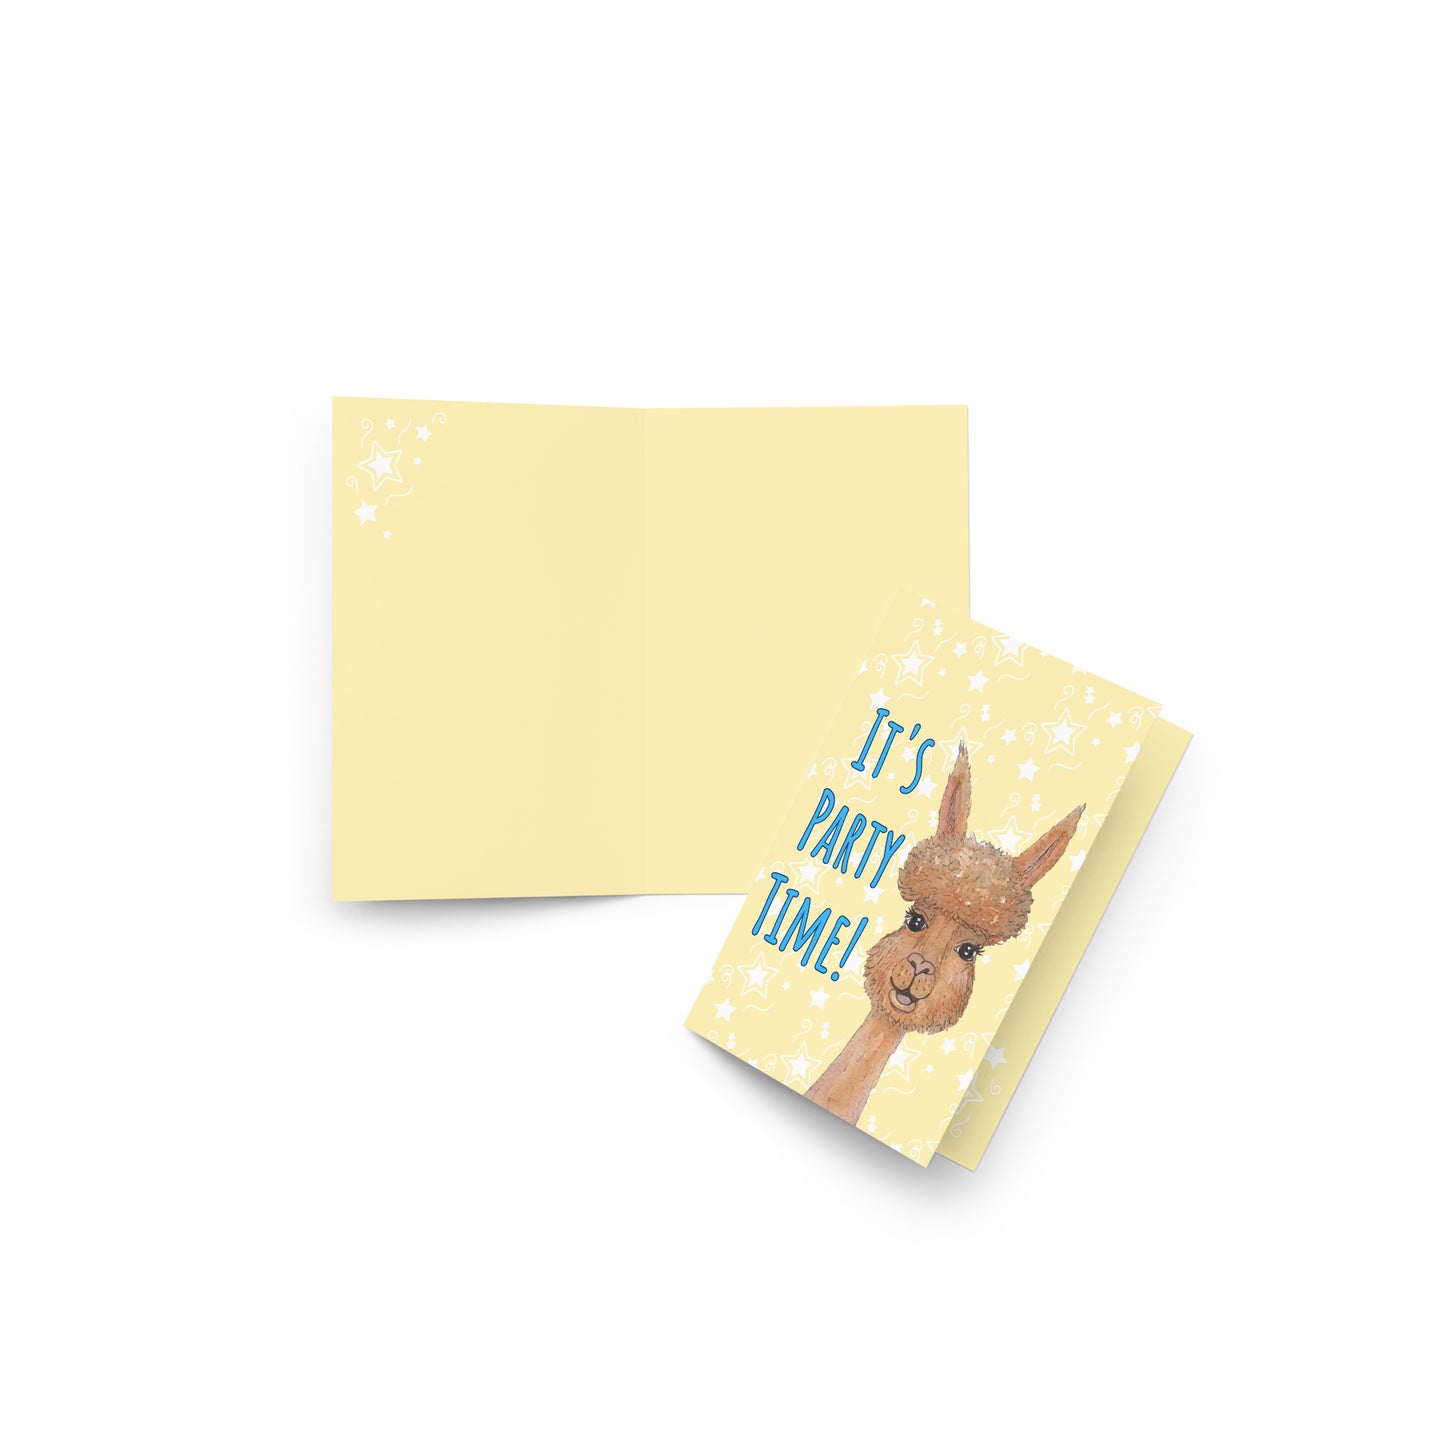 4 by 6 inch party alpaca greeting card and envelope. Image shows cover and inside. Background is pastel yellow with white star accents. Front has watercolor alpaca and text: It's party time!